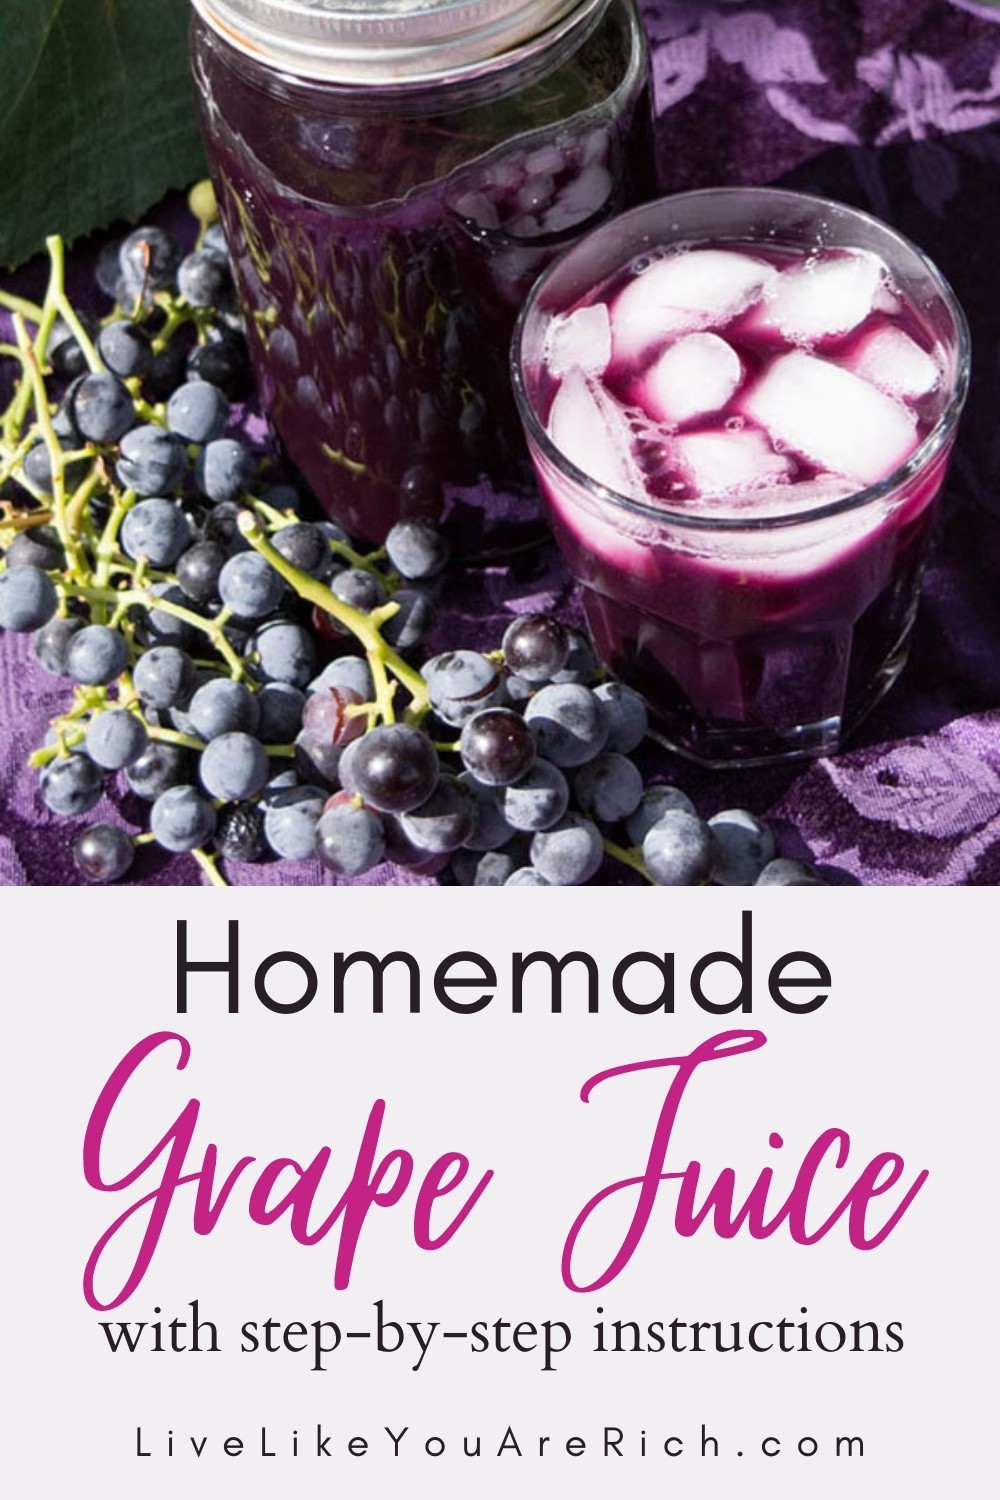 My mom has been an avid concord grape grower. She has many beautiful vines that produce a lot of grapes each Fall. Each Fall, we pick the grapes and juice them. My family and friends love the grape juice — especially mixed with Sprite or pink lemonade and chilled with ice. I’m sharing how she makes this homemade concord grape juice recipe. #grapejuice #concordgrapejuice